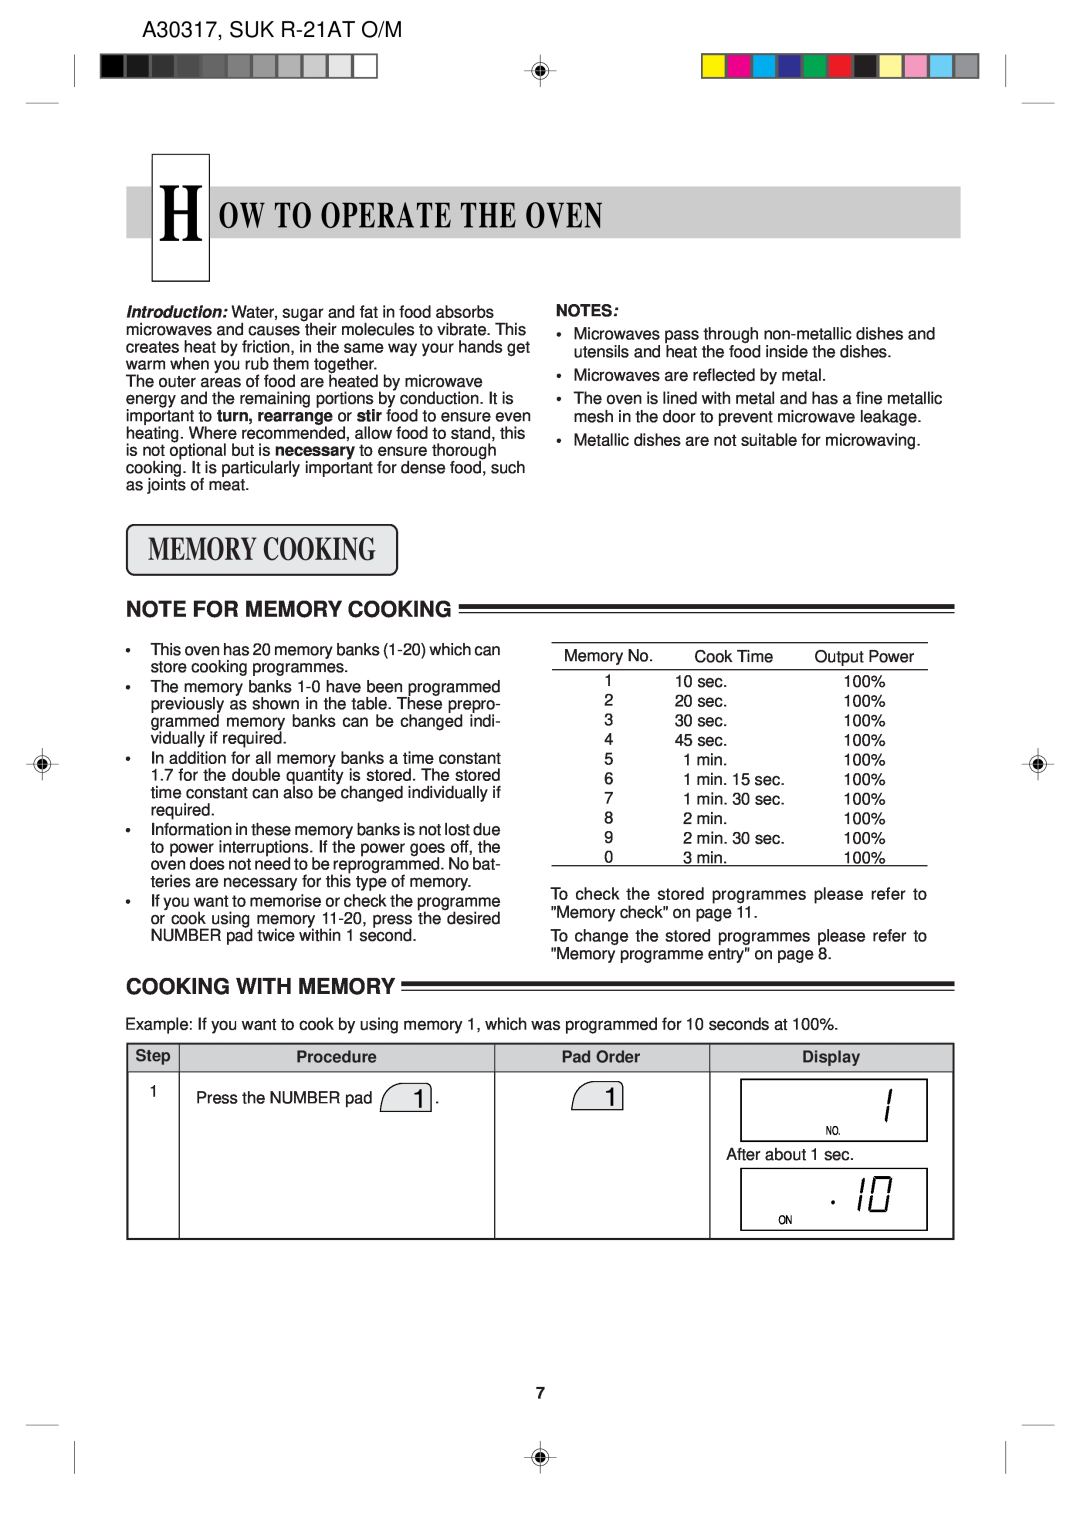 Sharp operation manual Ow To Operate The Oven, Note For Memory Cooking, Cooking With Memory, A30317, SUK R-21AT O/M 